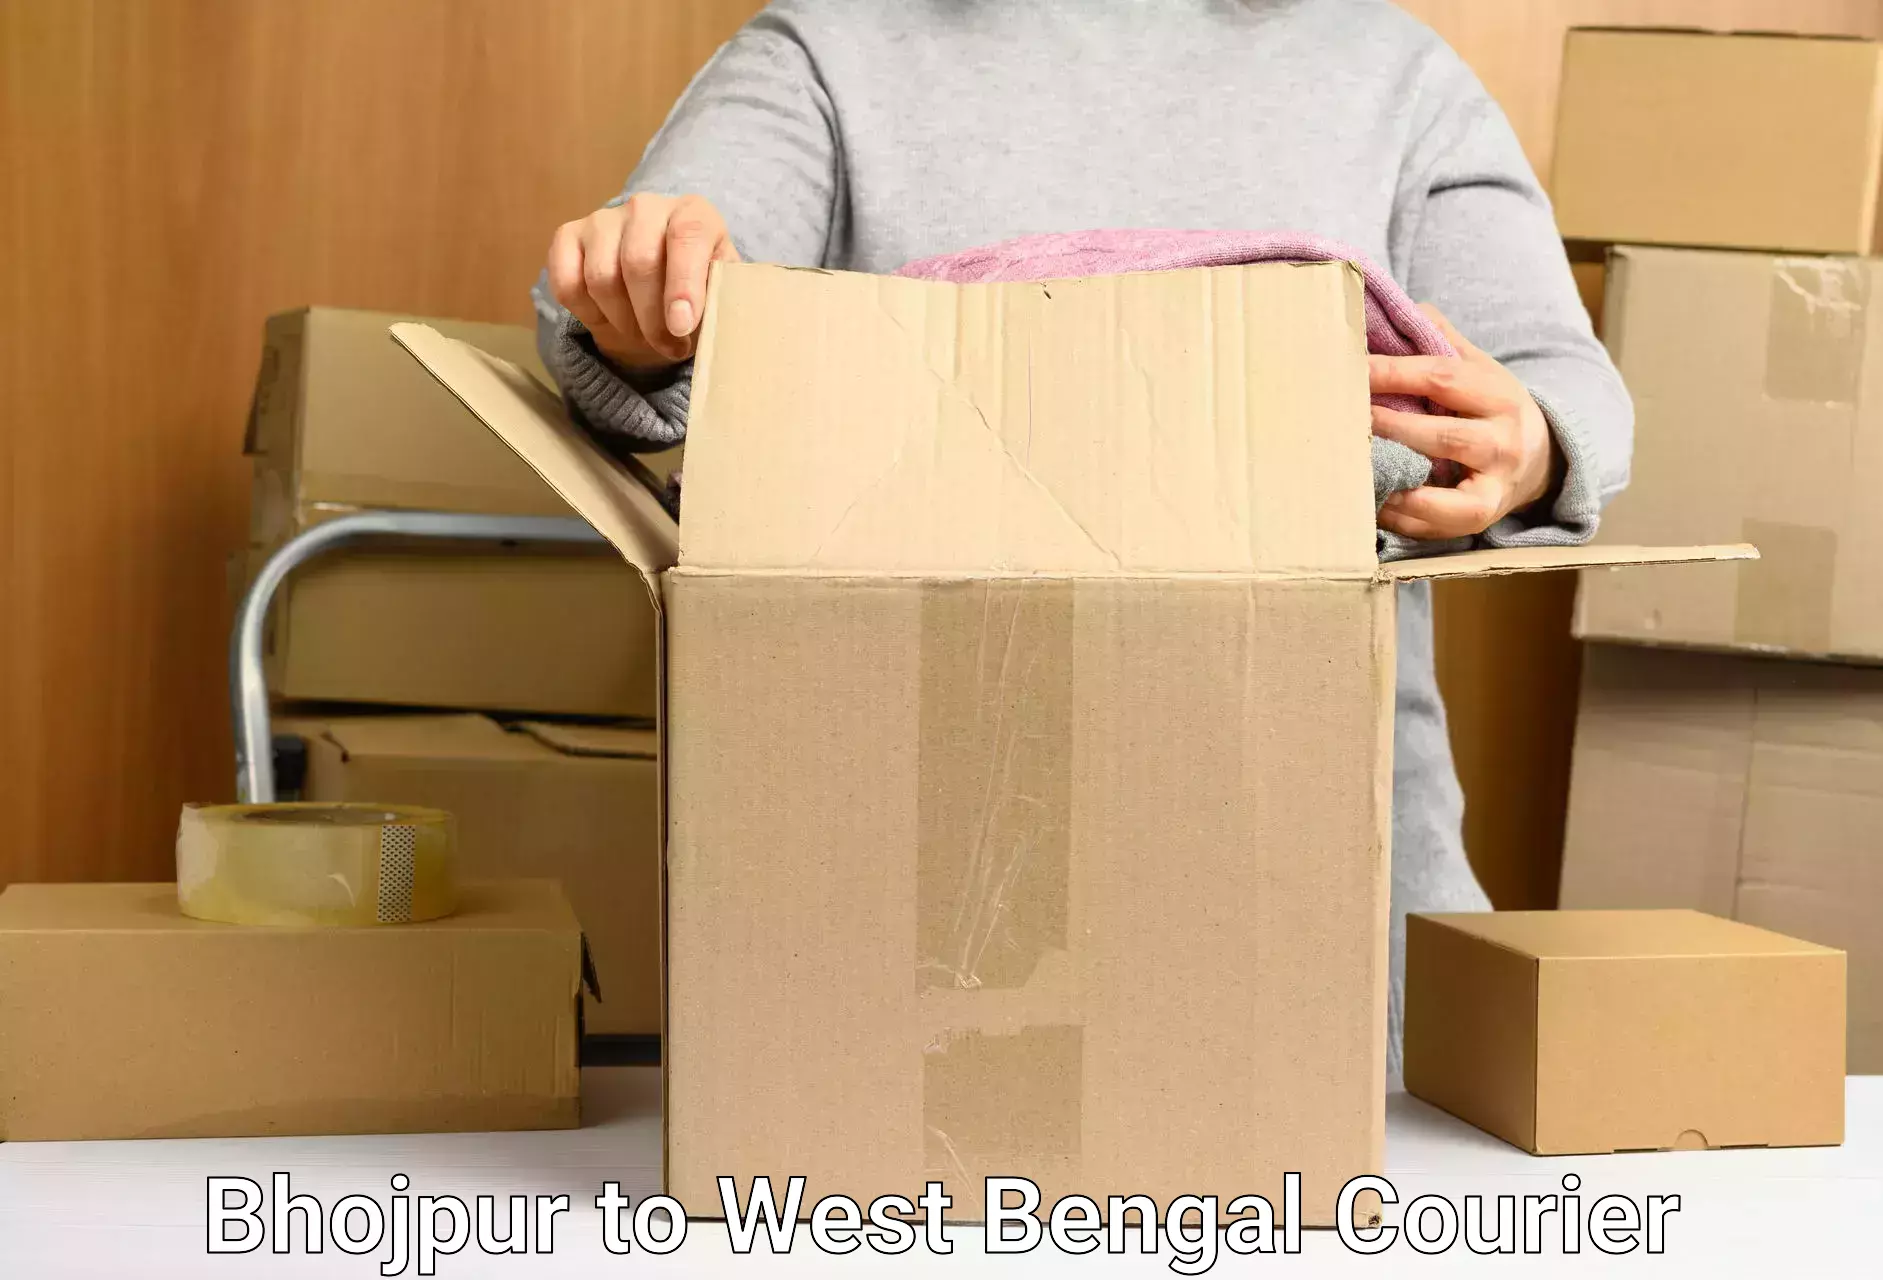 Full-service courier options in Bhojpur to Sonamukhi